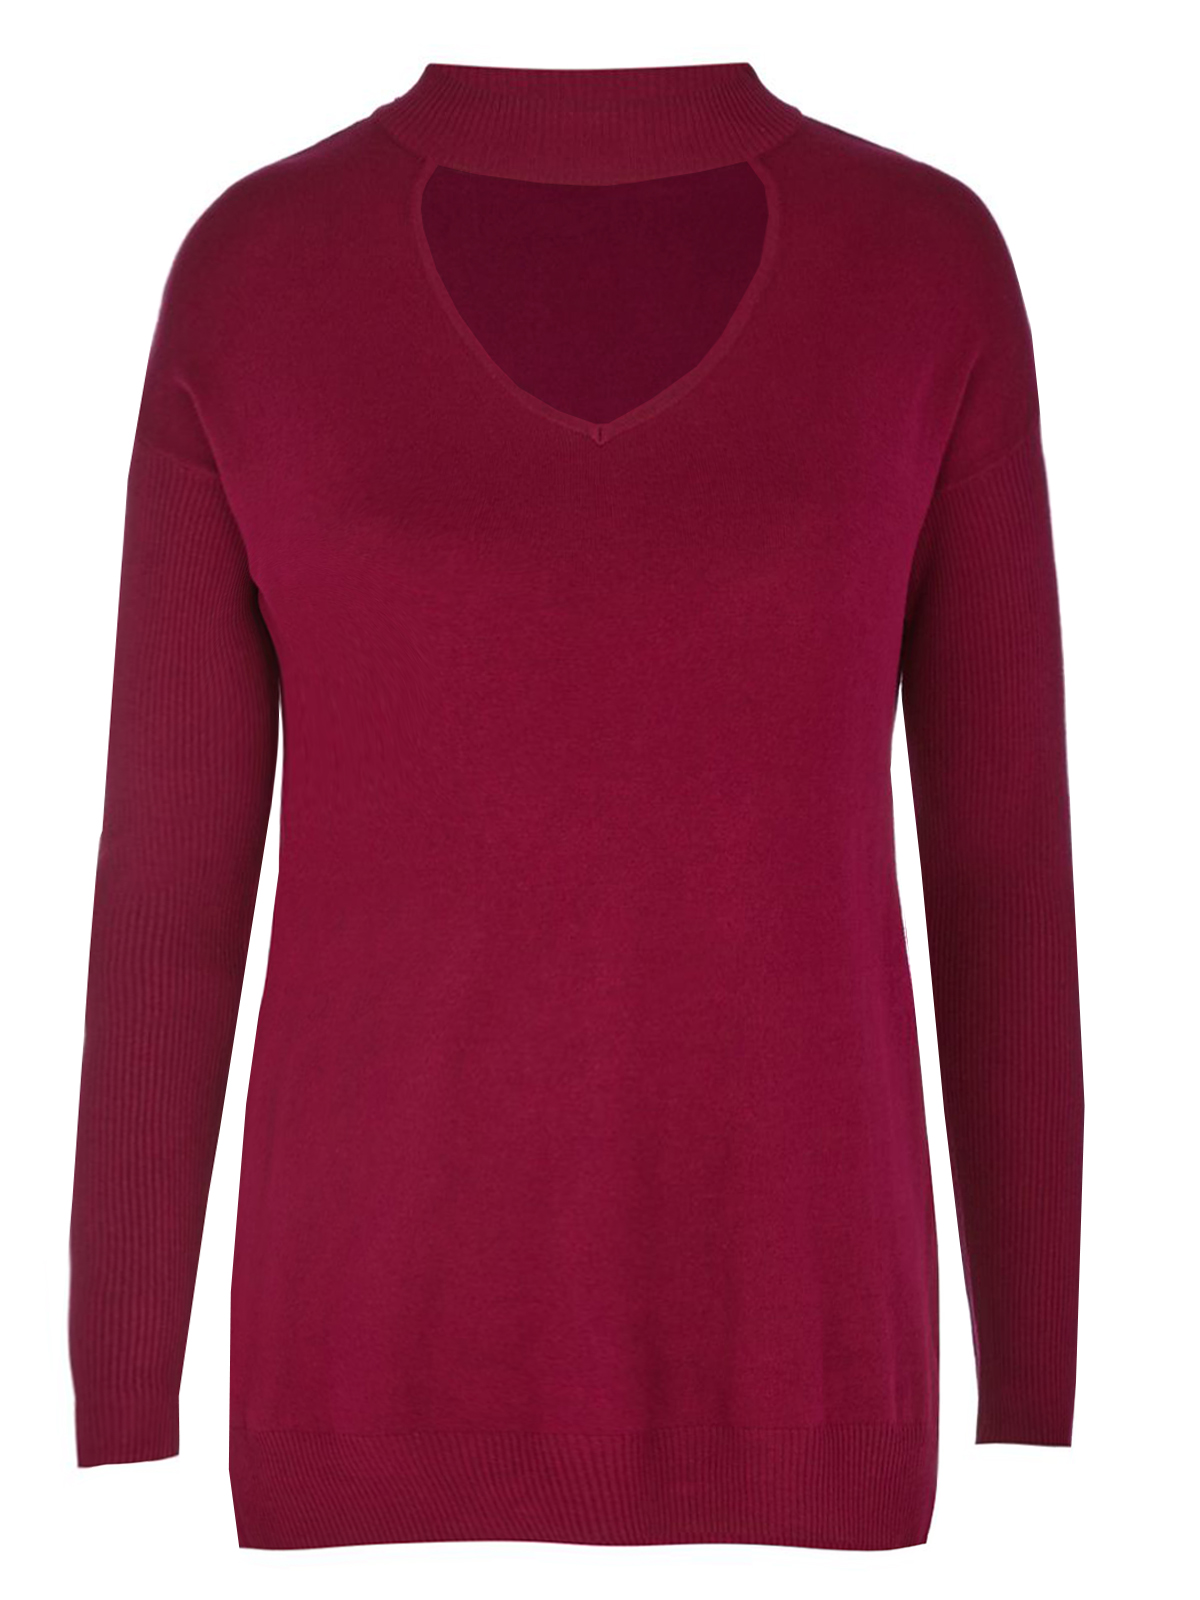 R3d H3rring MAGENTA Choker Neck Knitted Jumper - Size 8 to 20